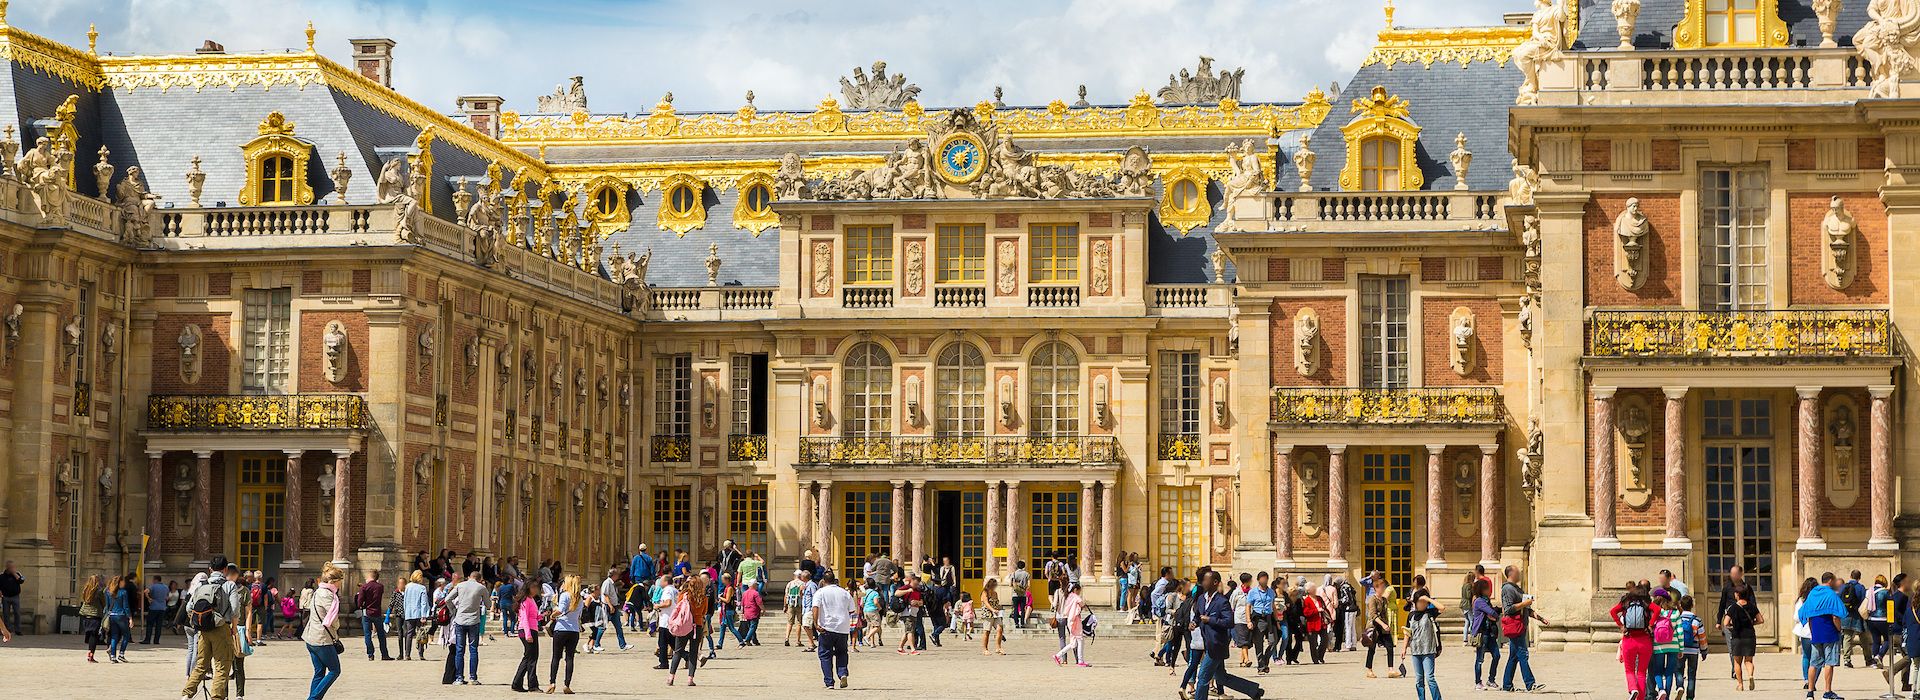 Palace & Gardens of Versailles Page